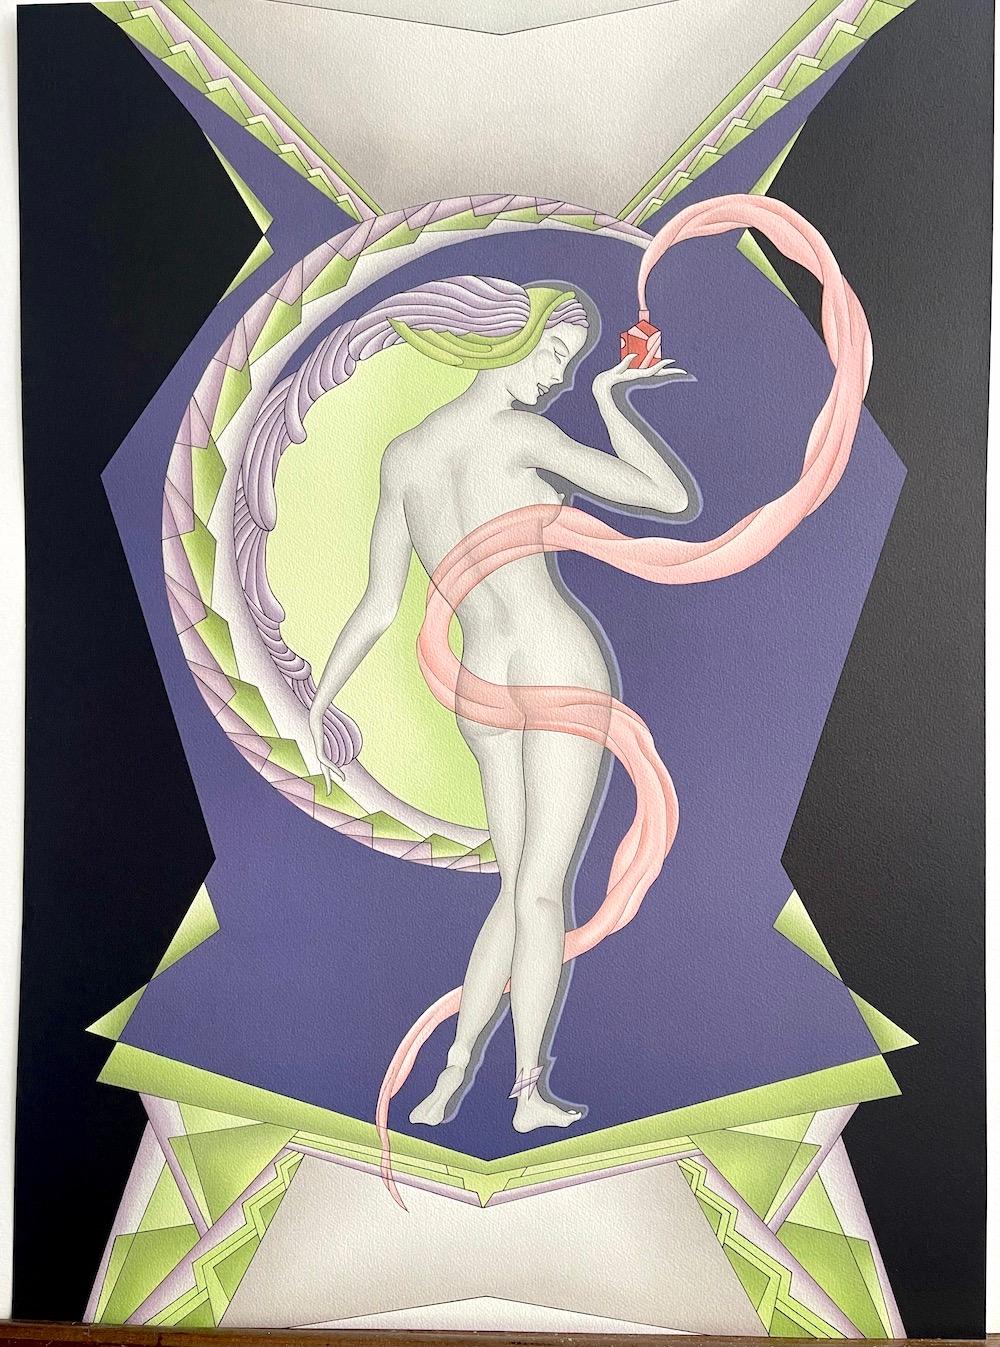 GENIE 1980 is a hand drawn, limited edition lithograph printed on archival Arches printmaking paper 100% acid free created by the artist Gustave Kaitz, American Art Deco Master 1913-1992. The color plates were hand drawn and printed using